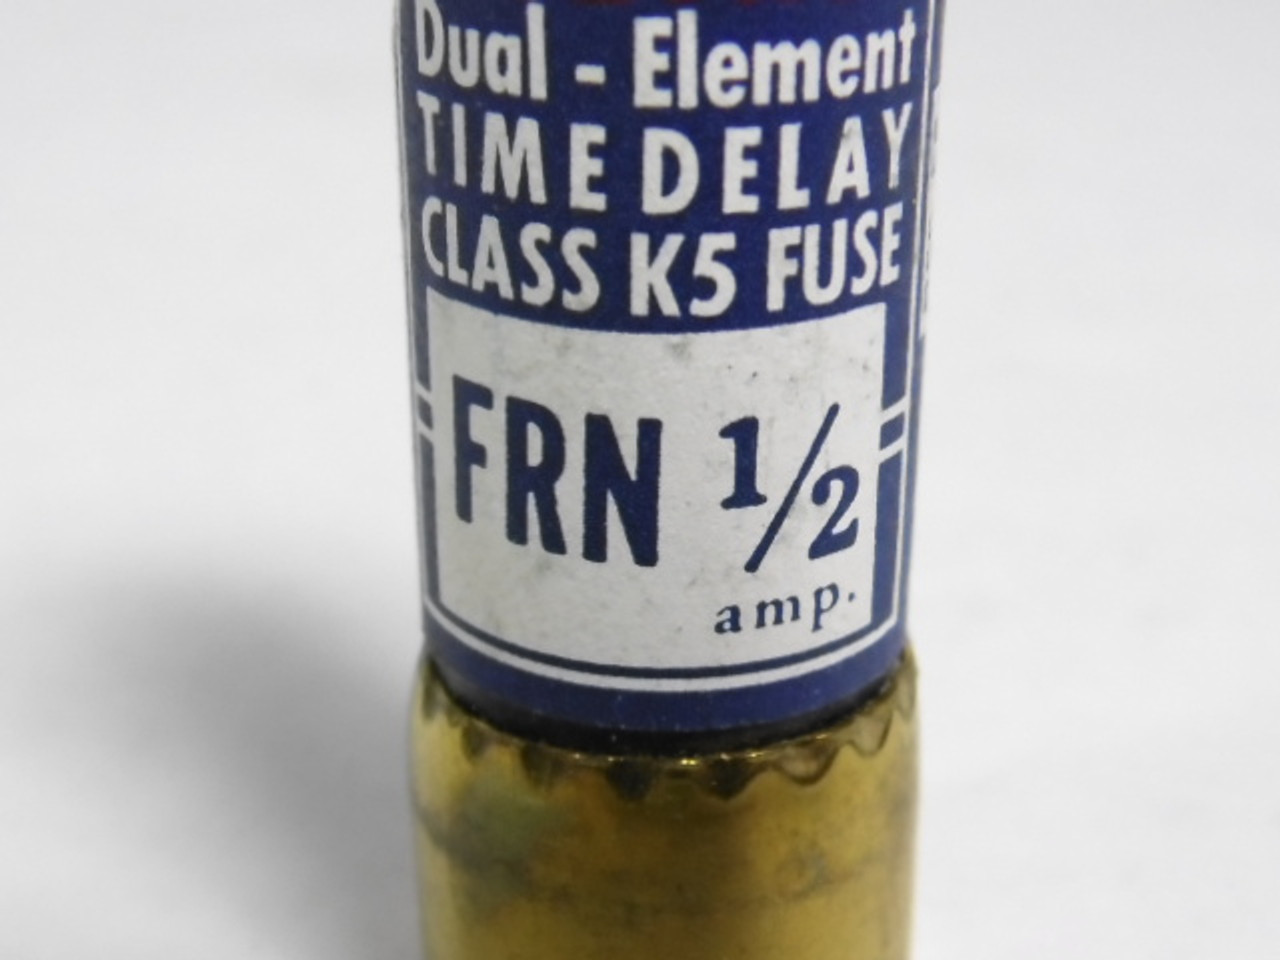 Fusetron FRN-1/2 Dual Element Time Delay Fuse 1/2A 250V 10-Pack ! NEW !